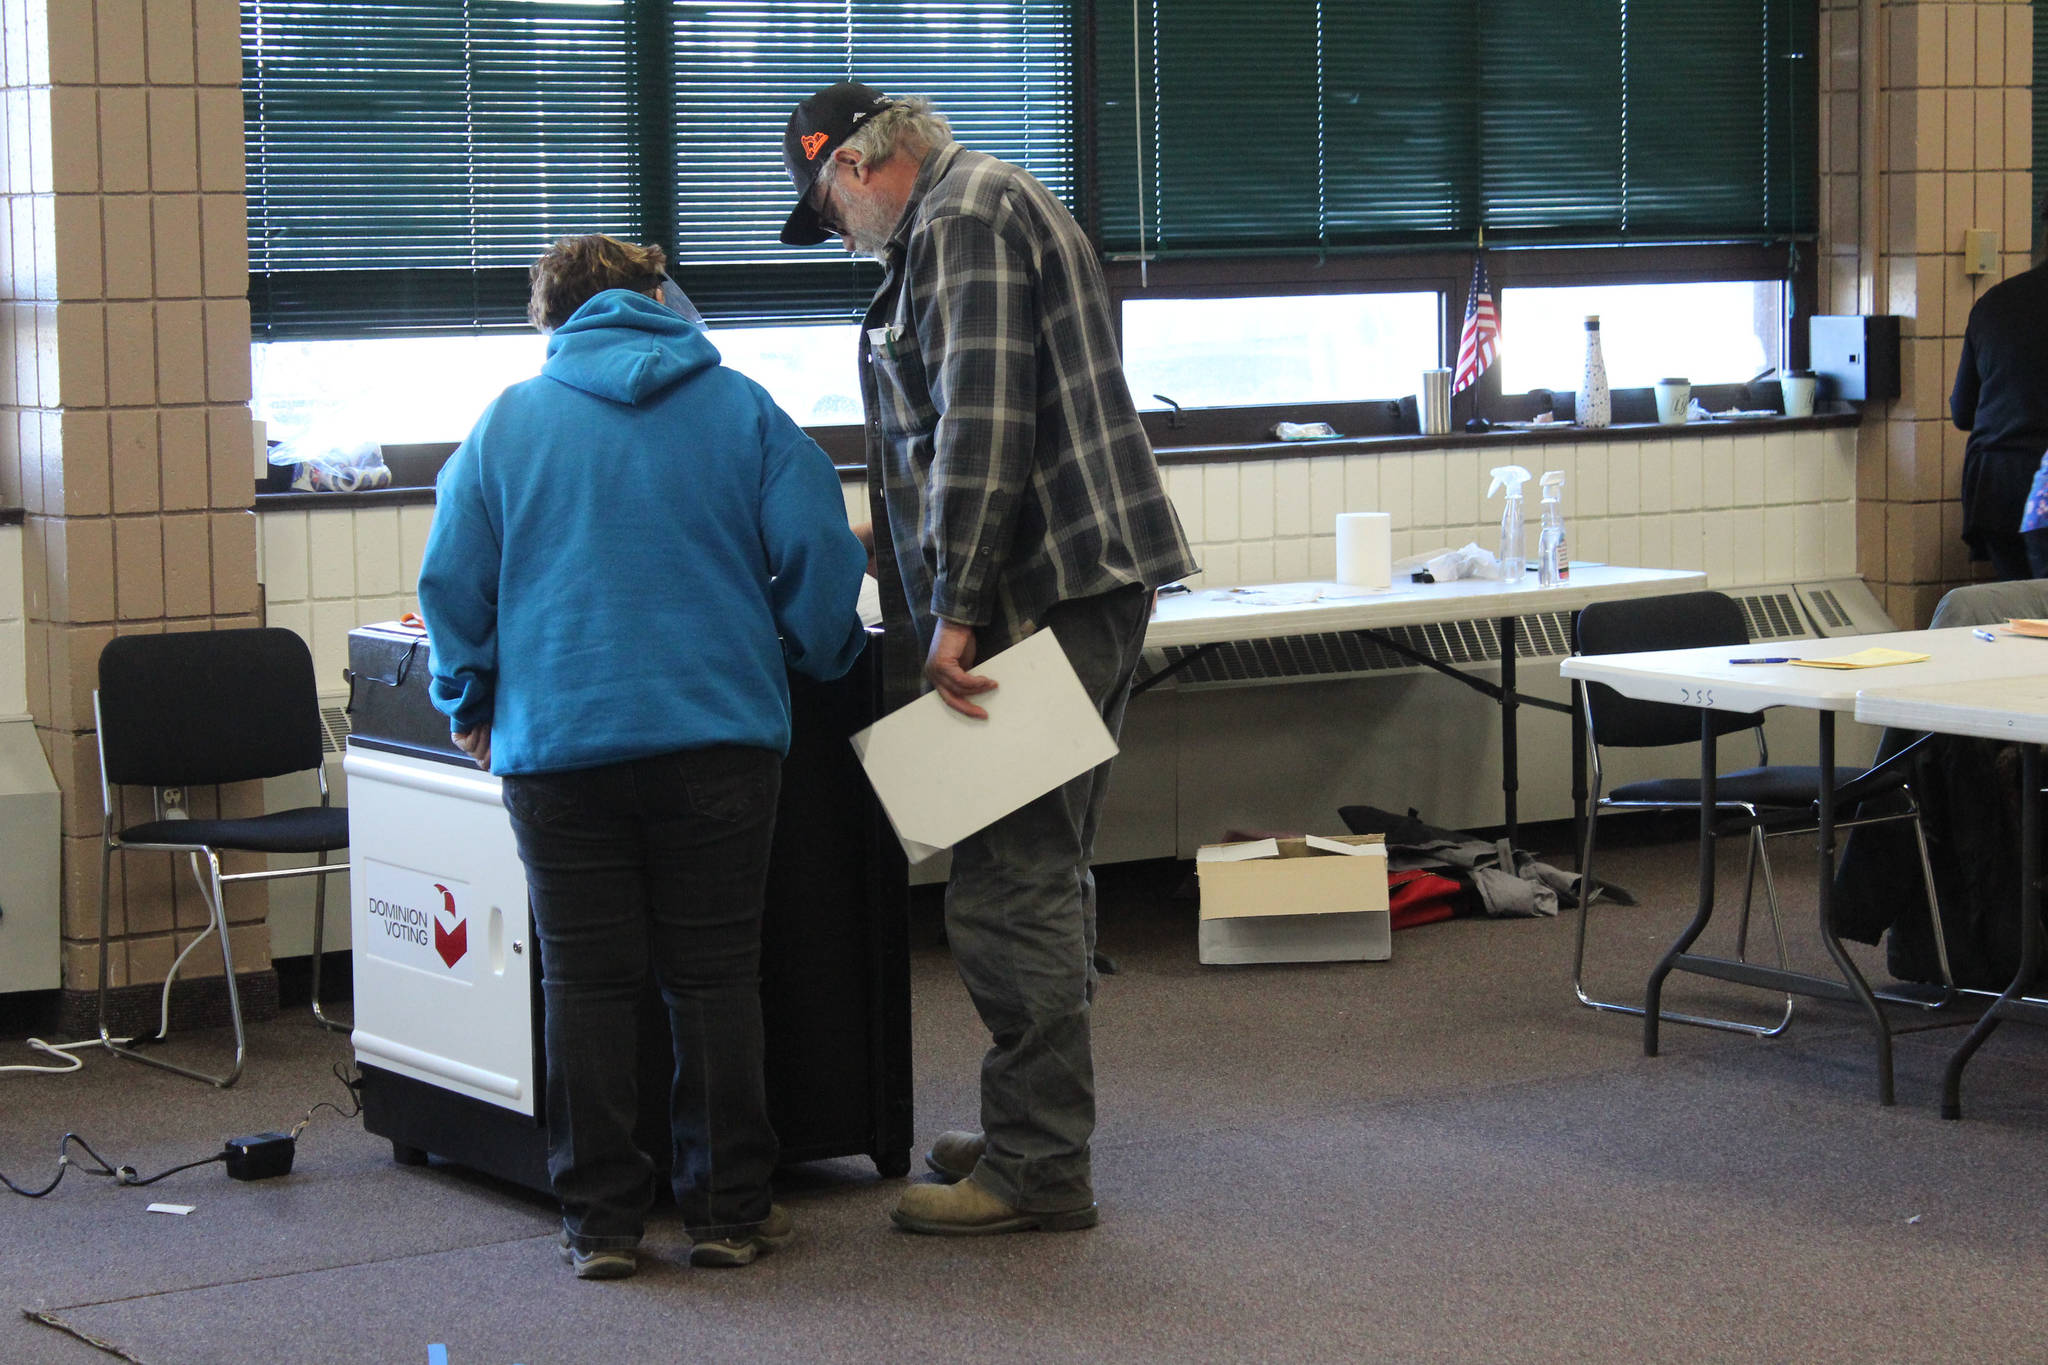 A poll worker helps a voter with their ballot at the Soldotna Regional Sports Complex on Tuesday, Nov. 3 in Soldotna, Alaska. (Photo by Ashlyn O’Hara/Peninsula Clarion)